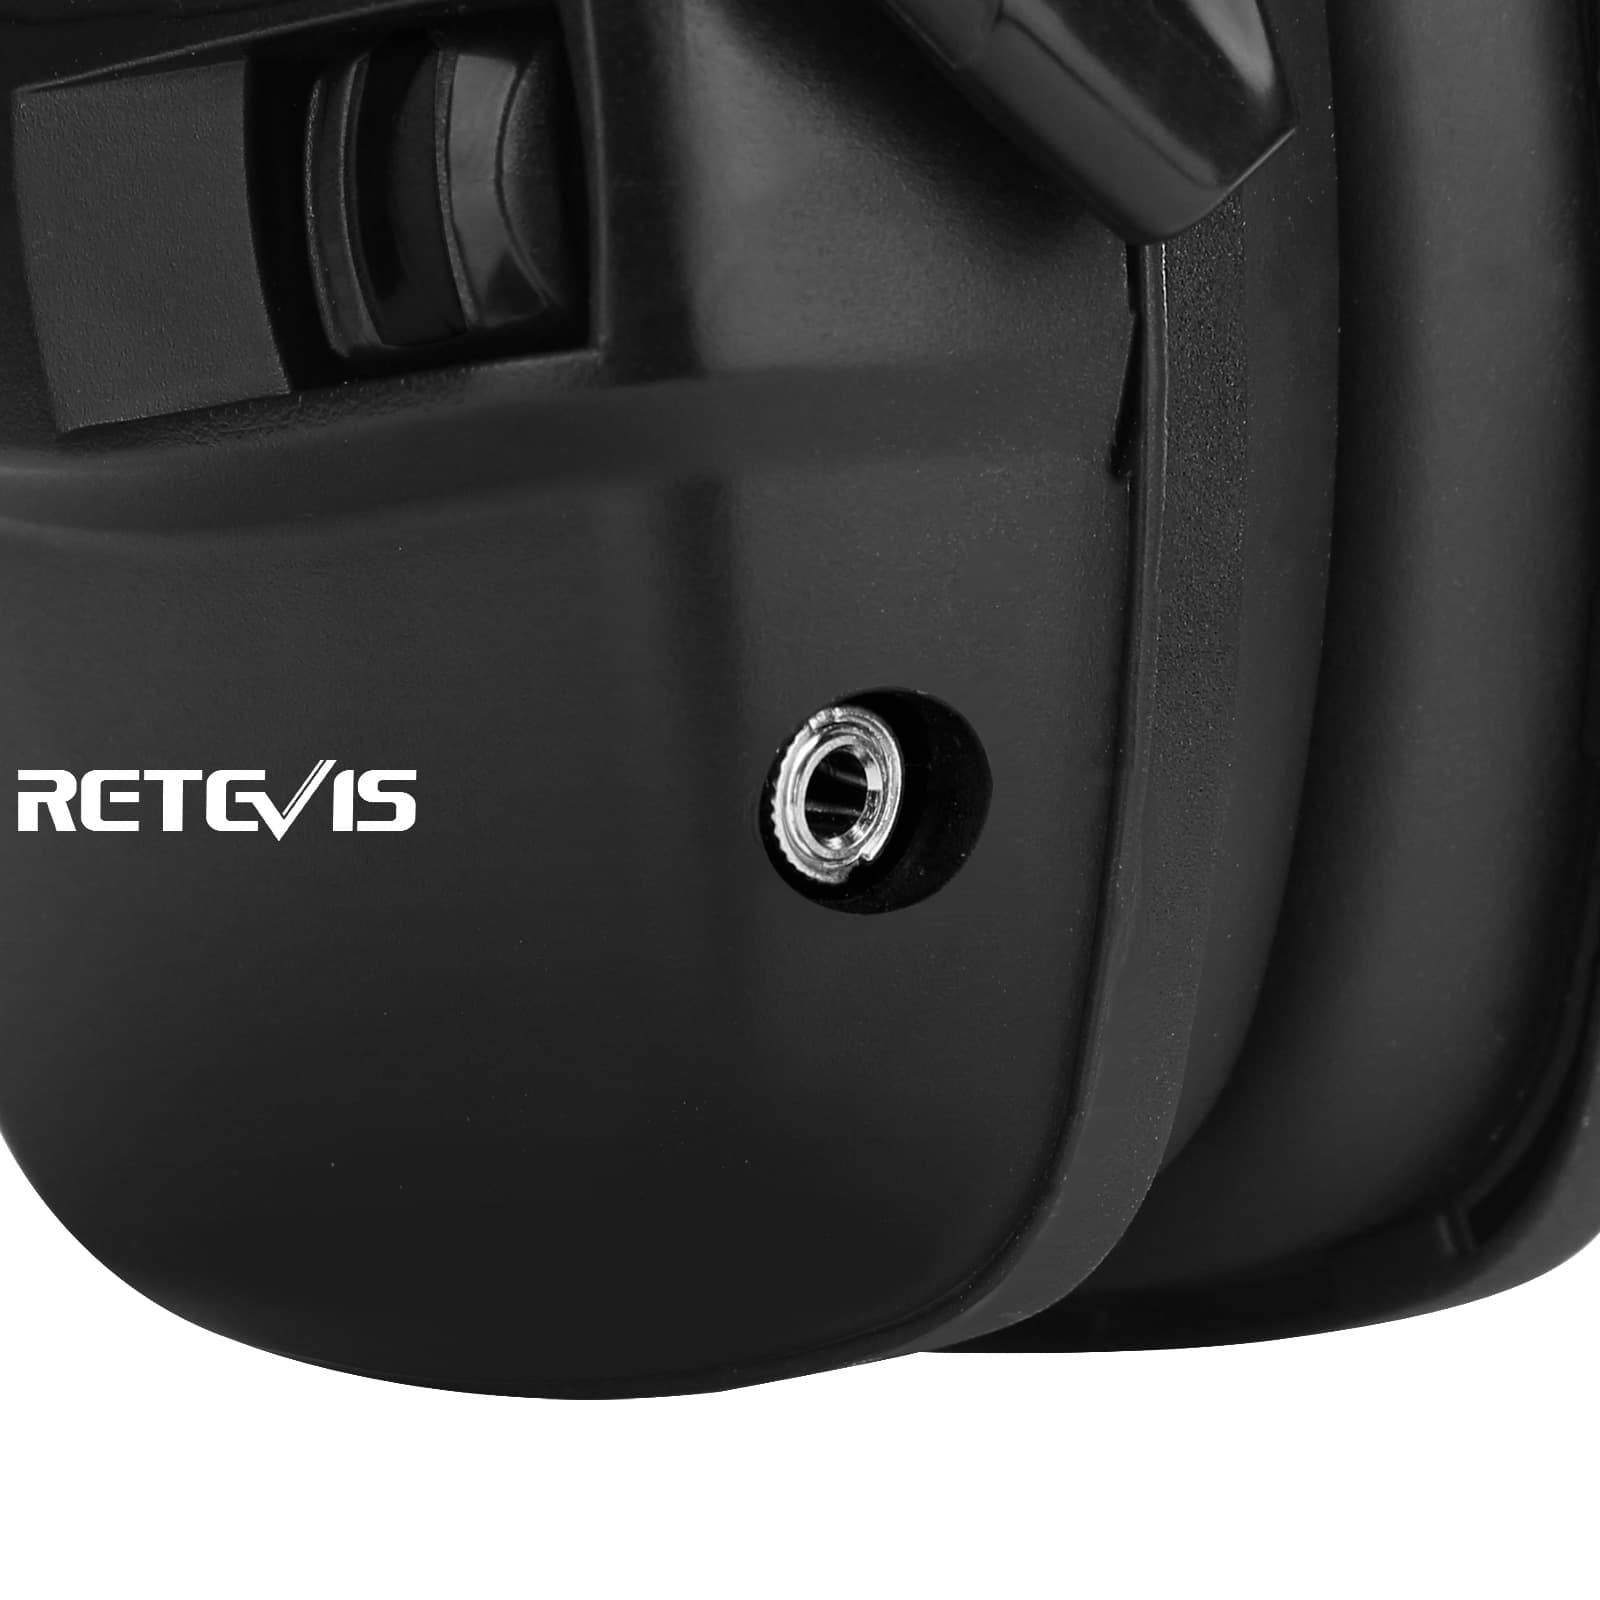 Retevis EHN003 3.5mm AUX Jack for Shooting Electronic Hearing Protection Earmuffs NRR 24dB